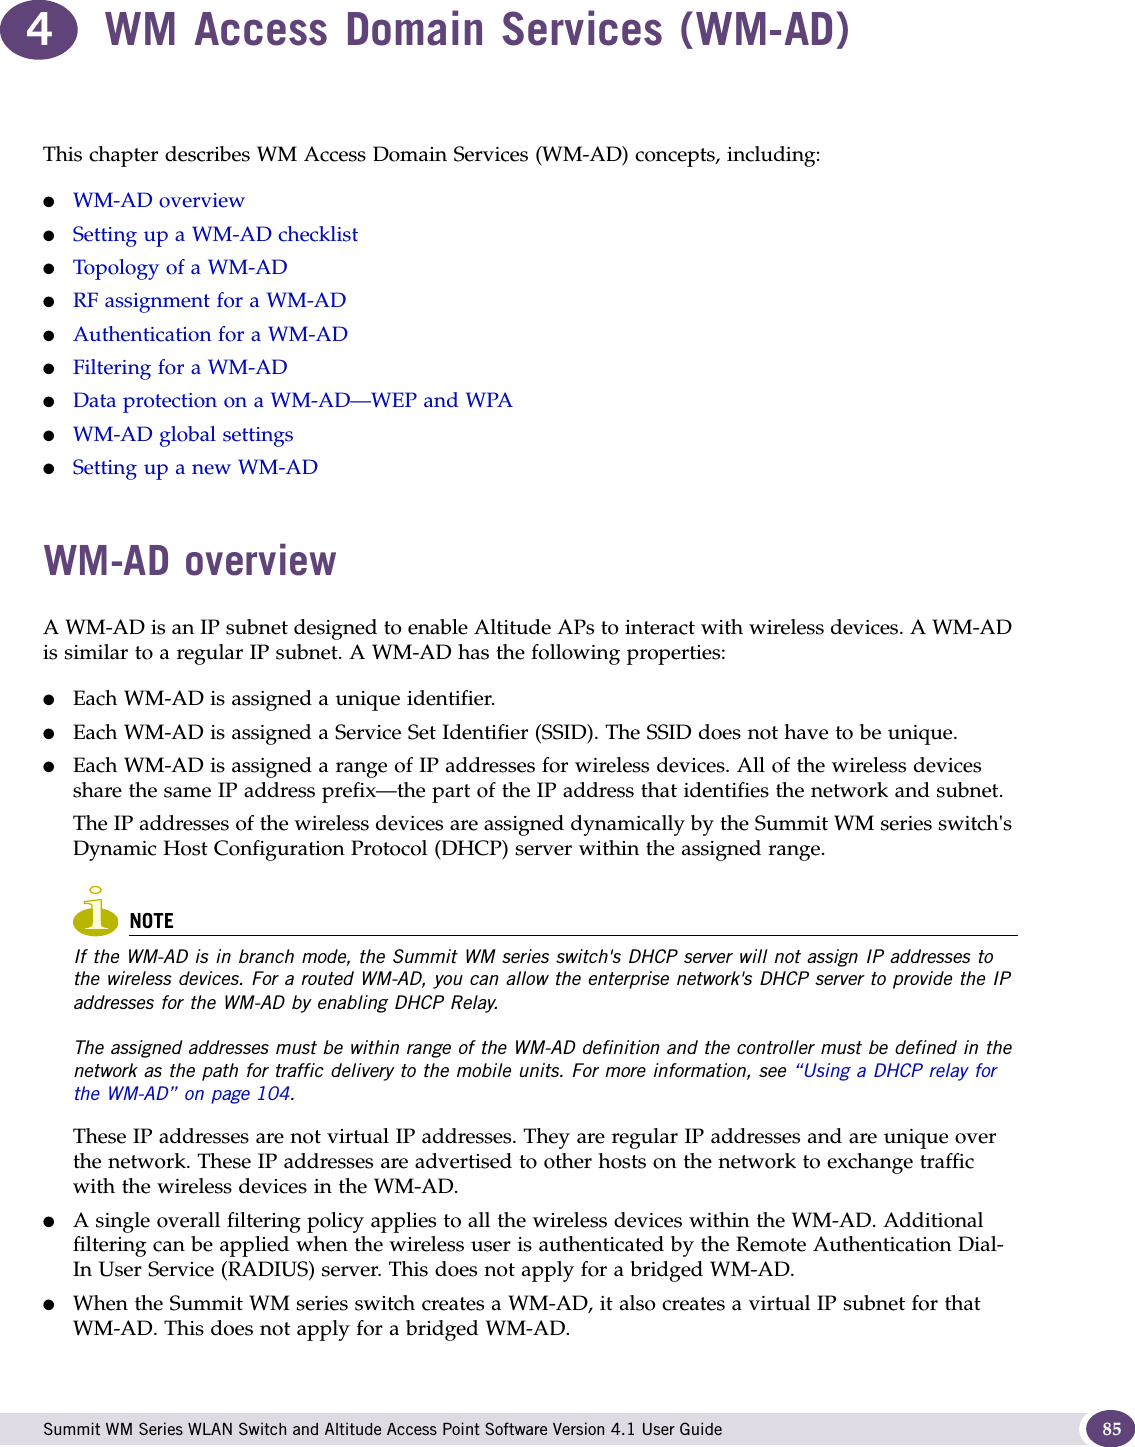  Summit WM Series WLAN Switch and Altitude Access Point Software Version 4.1 User Guide 854WM Access Domain Services (WM-AD)This chapter describes WM Access Domain Services (WM-AD) concepts, including:●WM-AD overview●Setting up a WM-AD checklist●Topology of a WM-AD●RF assignment for a WM-AD●Authentication for a WM-AD●Filtering for a WM-AD●Data protection on a WM-AD—WEP and WPA●WM-AD global settings●Setting up a new WM-ADWM-AD overviewA WM-AD is an IP subnet designed to enable Altitude APs to interact with wireless devices. A WM-AD is similar to a regular IP subnet. A WM-AD has the following properties:●Each WM-AD is assigned a unique identifier.●Each WM-AD is assigned a Service Set Identifier (SSID). The SSID does not have to be unique.●Each WM-AD is assigned a range of IP addresses for wireless devices. All of the wireless devices share the same IP address prefix—the part of the IP address that identifies the network and subnet. The IP addresses of the wireless devices are assigned dynamically by the Summit WM series switch&apos;s Dynamic Host Configuration Protocol (DHCP) server within the assigned range.NOTEIf the WM-AD is in branch mode, the Summit WM series switch&apos;s DHCP server will not assign IP addresses to the wireless devices. For a routed WM-AD, you can allow the enterprise network&apos;s DHCP server to provide the IP addresses for the WM-AD by enabling DHCP Relay. The assigned addresses must be within range of the WM-AD definition and the controller must be defined in the network as the path for traffic delivery to the mobile units. For more information, see “Using a DHCP relay for the WM-AD” on page 104. These IP addresses are not virtual IP addresses. They are regular IP addresses and are unique over the network. These IP addresses are advertised to other hosts on the network to exchange traffic with the wireless devices in the WM-AD.●A single overall filtering policy applies to all the wireless devices within the WM-AD. Additional filtering can be applied when the wireless user is authenticated by the Remote Authentication Dial-In User Service (RADIUS) server. This does not apply for a bridged WM-AD.●When the Summit WM series switch creates a WM-AD, it also creates a virtual IP subnet for that WM-AD. This does not apply for a bridged WM-AD.